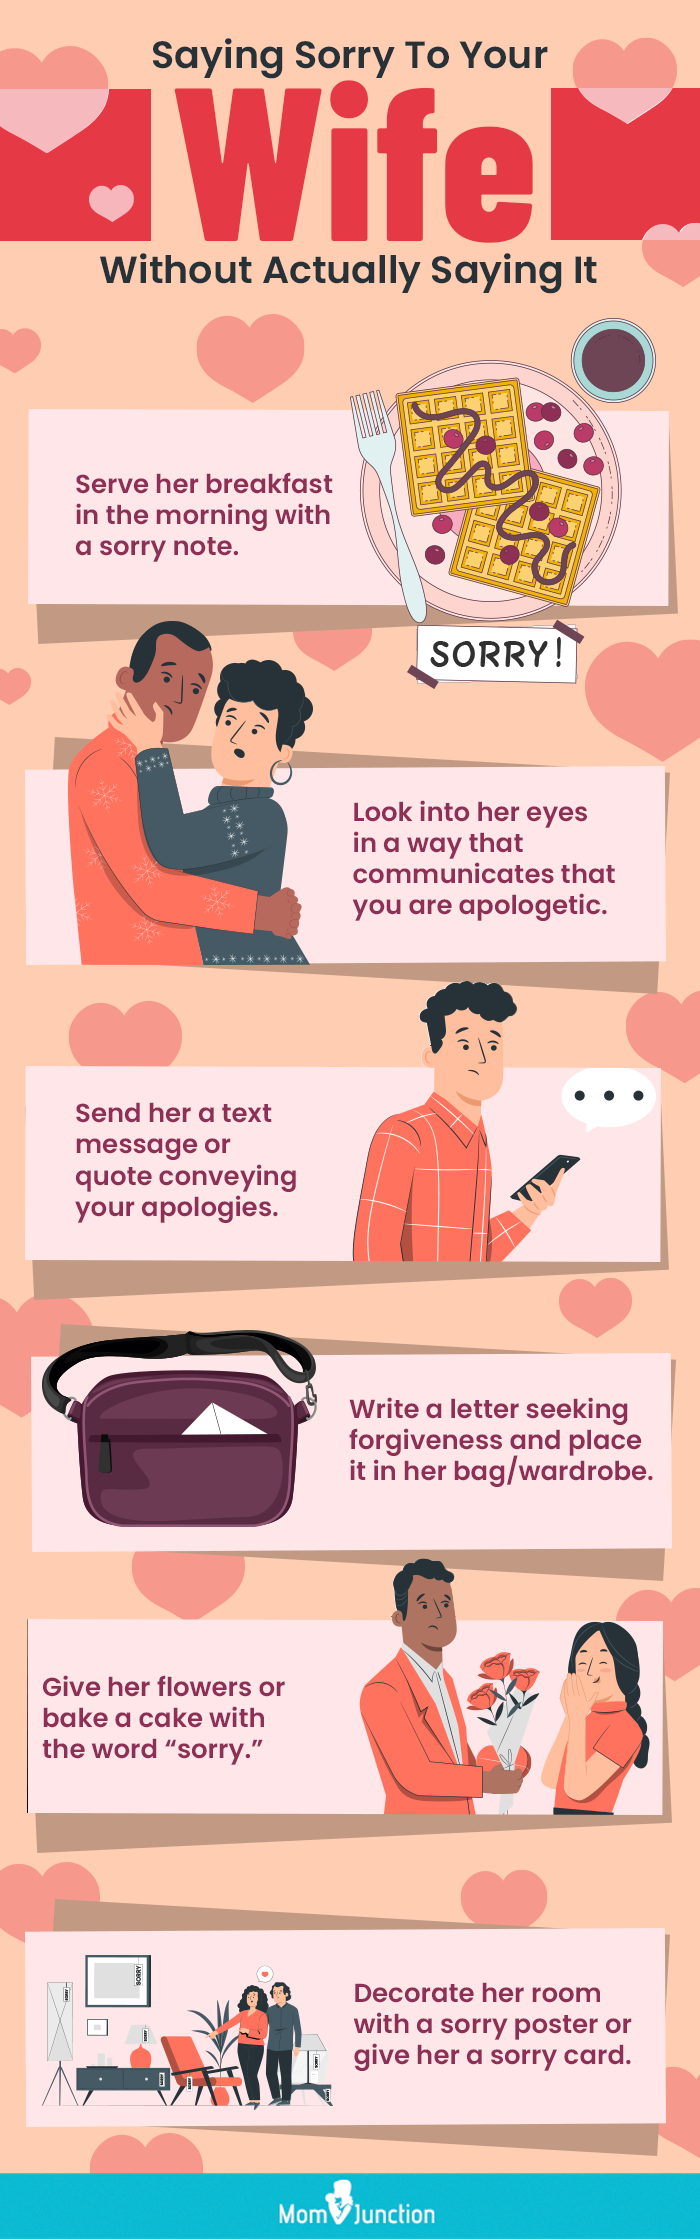 saying sorry to your wife (infographic)